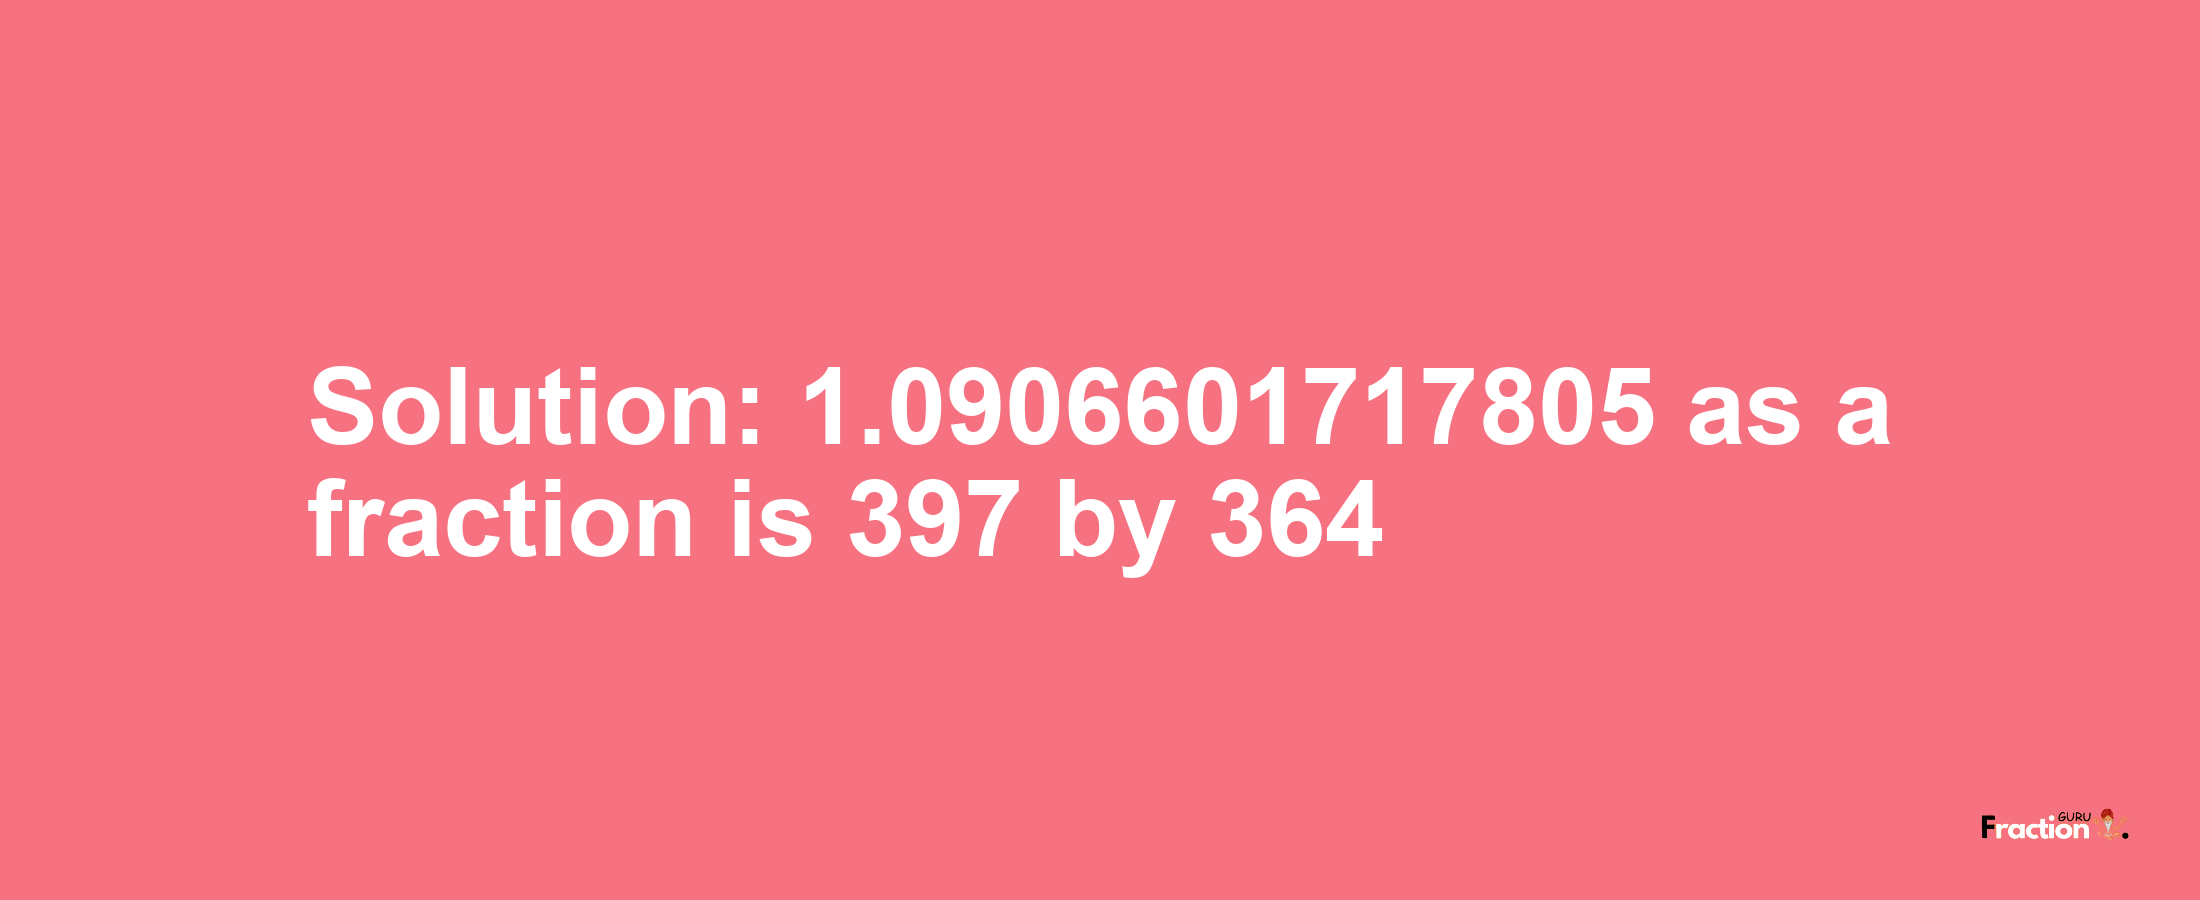 Solution:1.0906601717805 as a fraction is 397/364